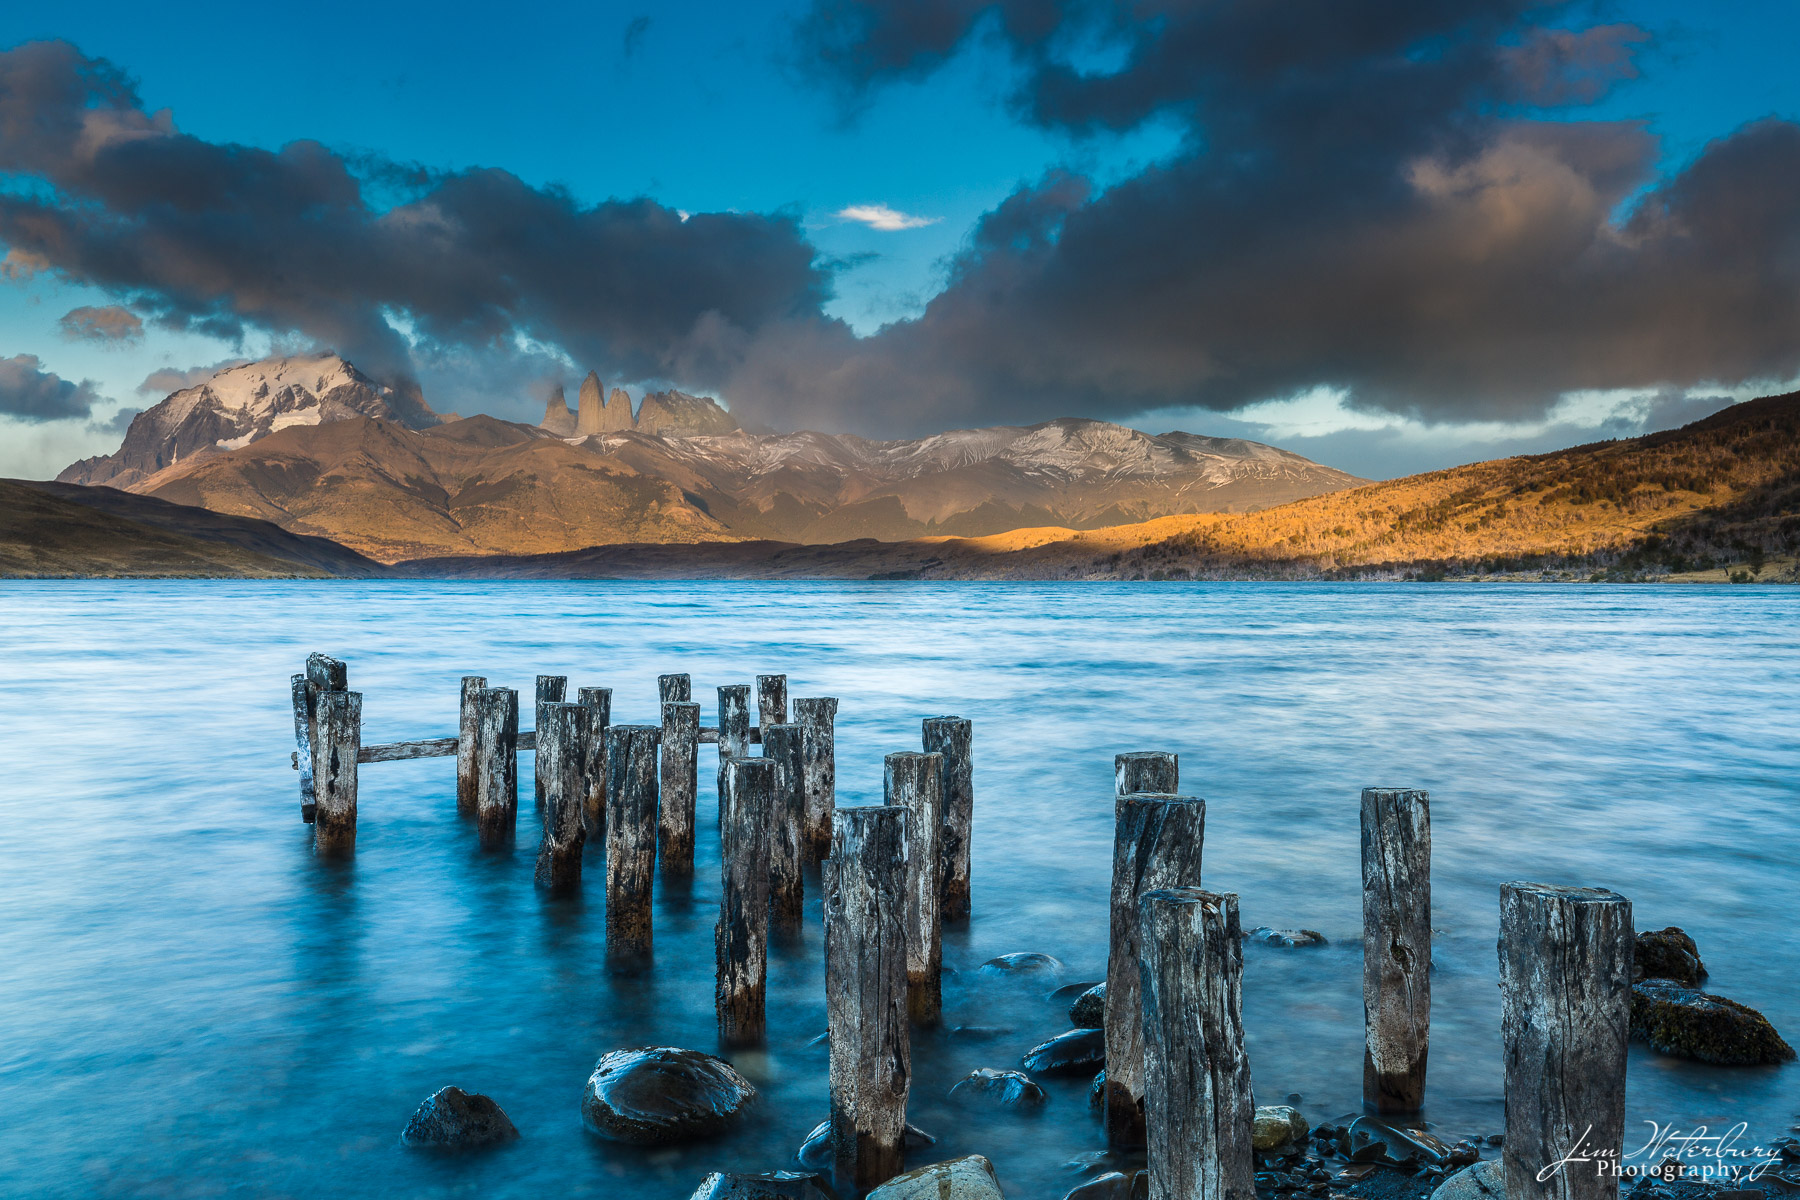 Remnants of an old pier in Lake Pehoe, looking back toward the mountains of Torres del Paine, Patagonia.